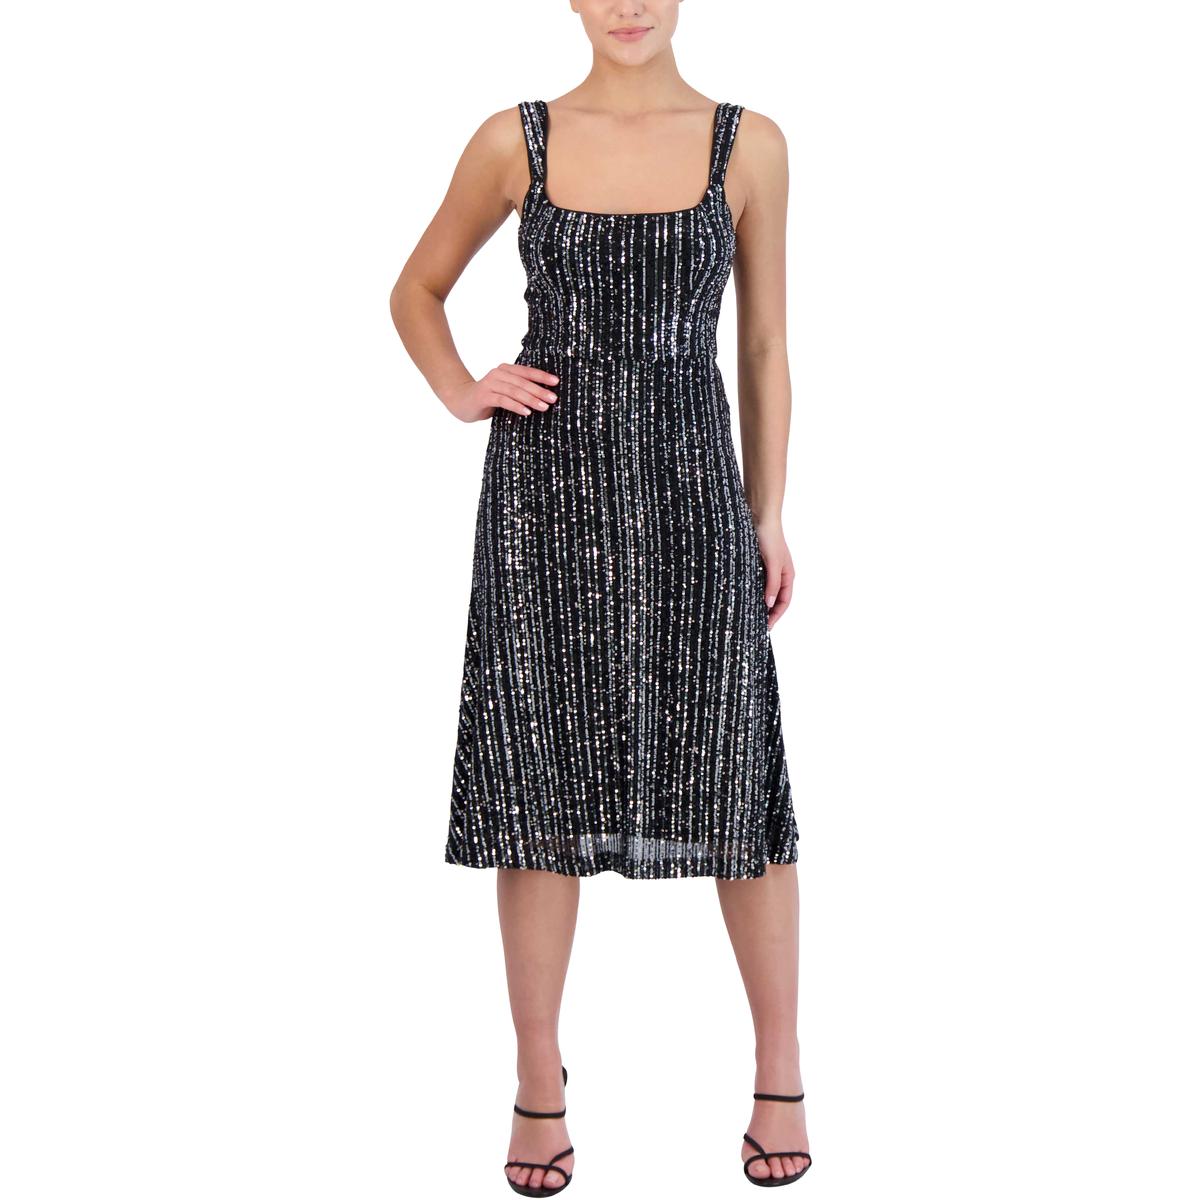 Laundry by Shelli Segal Womens Embellished Knee Cocktail and Party Dress Black 4